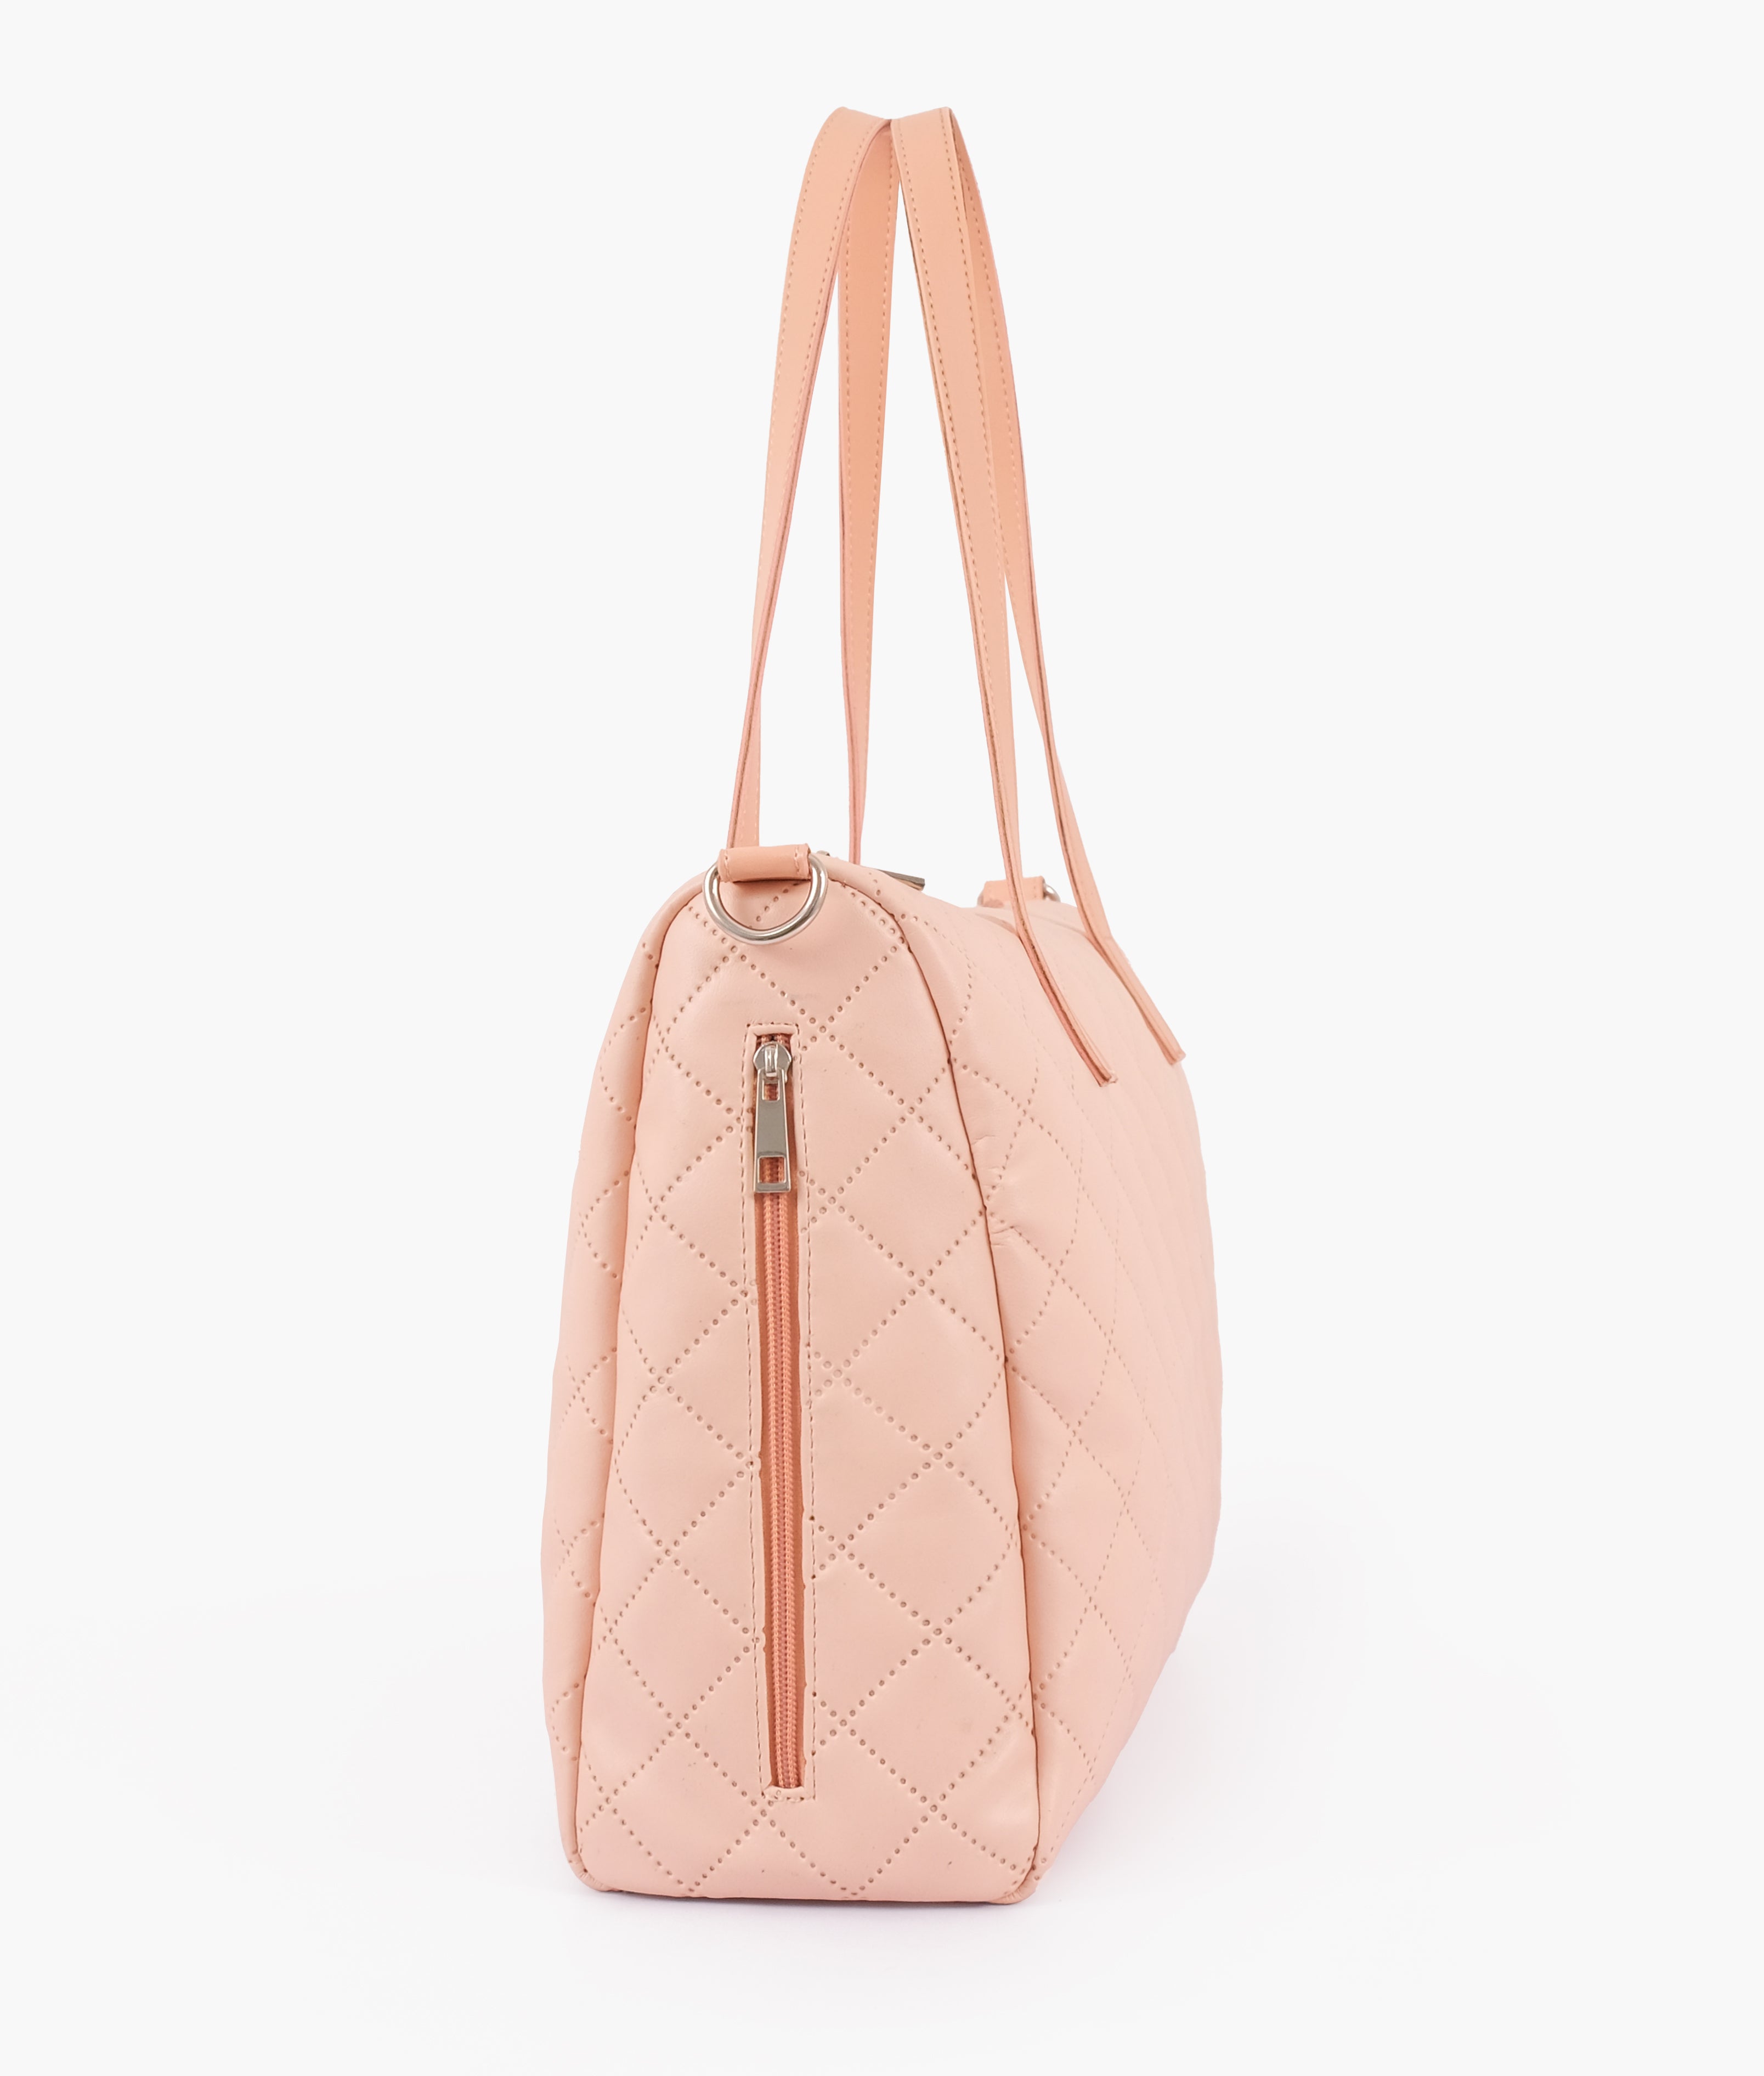 Baby pink quilted carryall tote bag